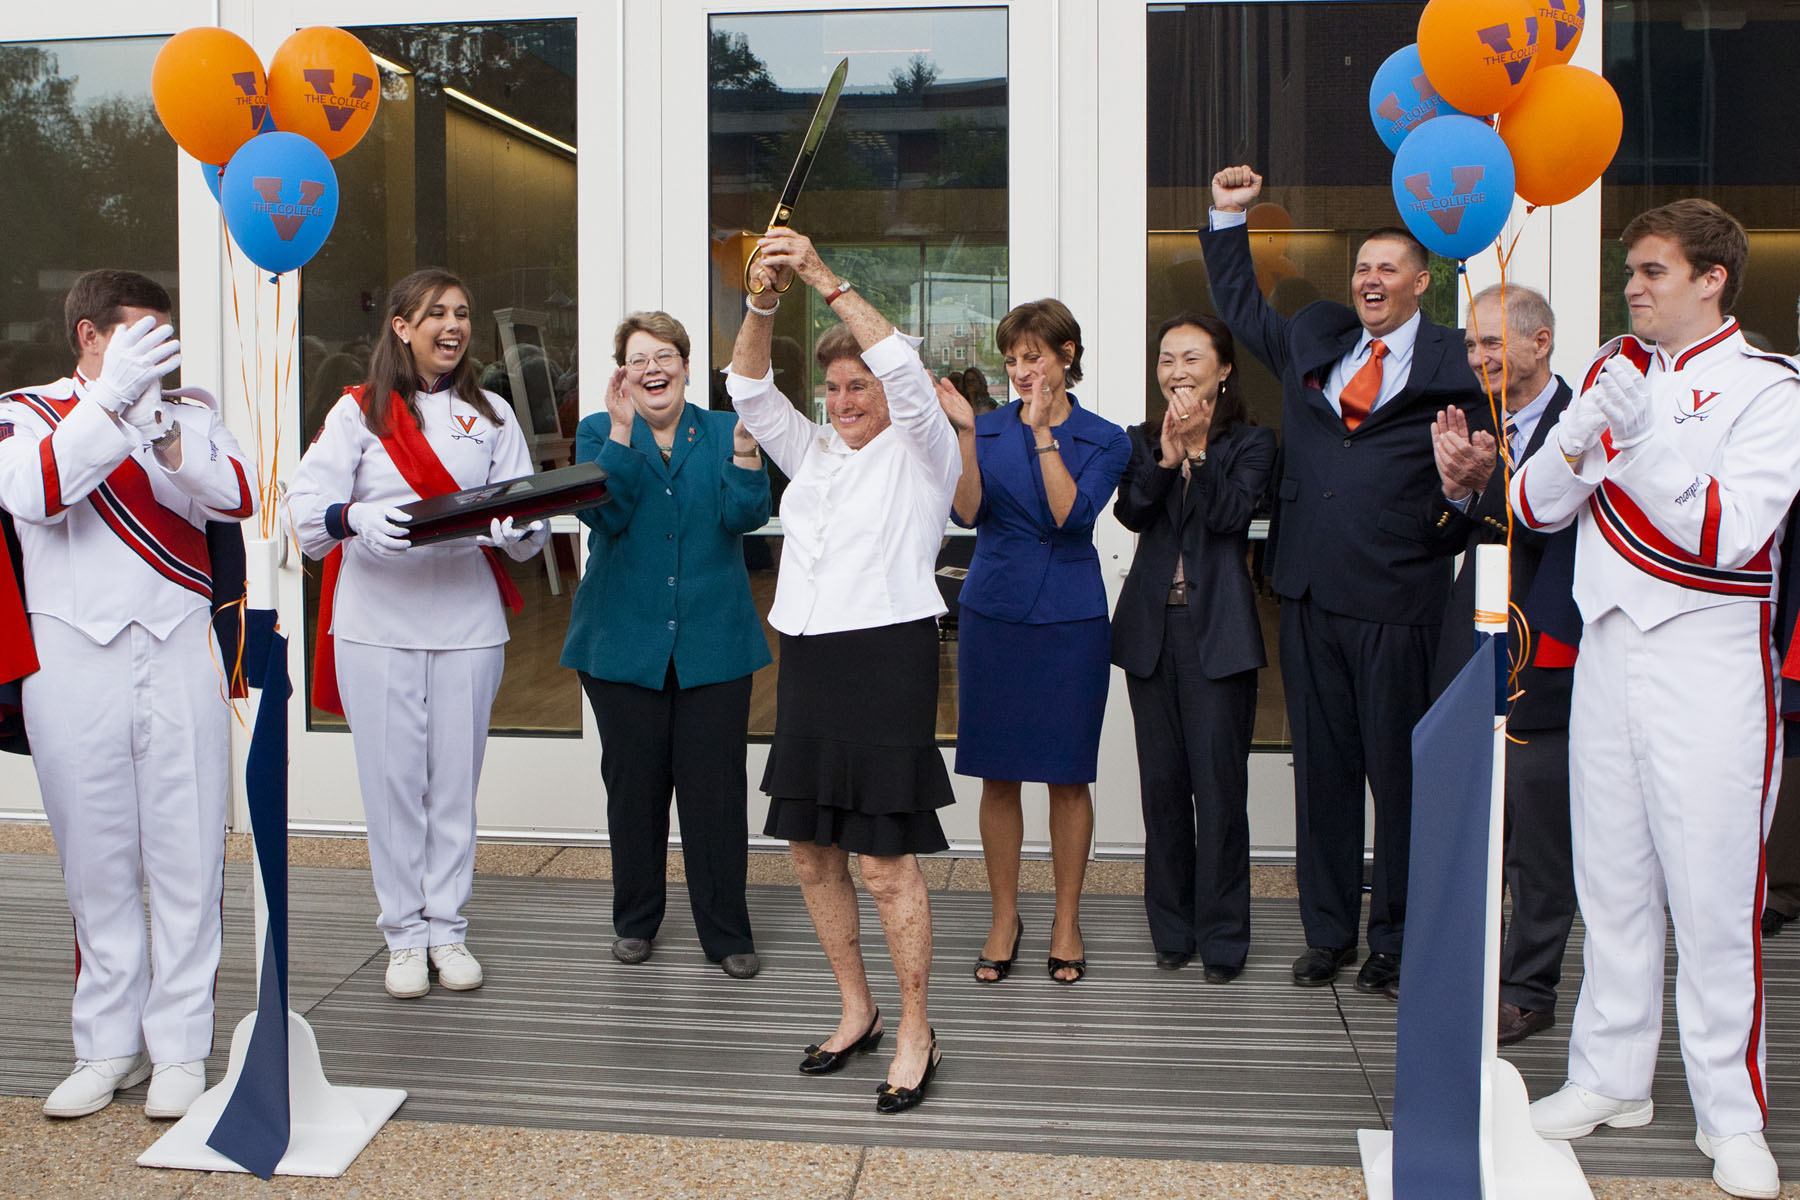 Hunter Smith cuts the ribbon on the band building with a saber as band members and UVA executive members cheer